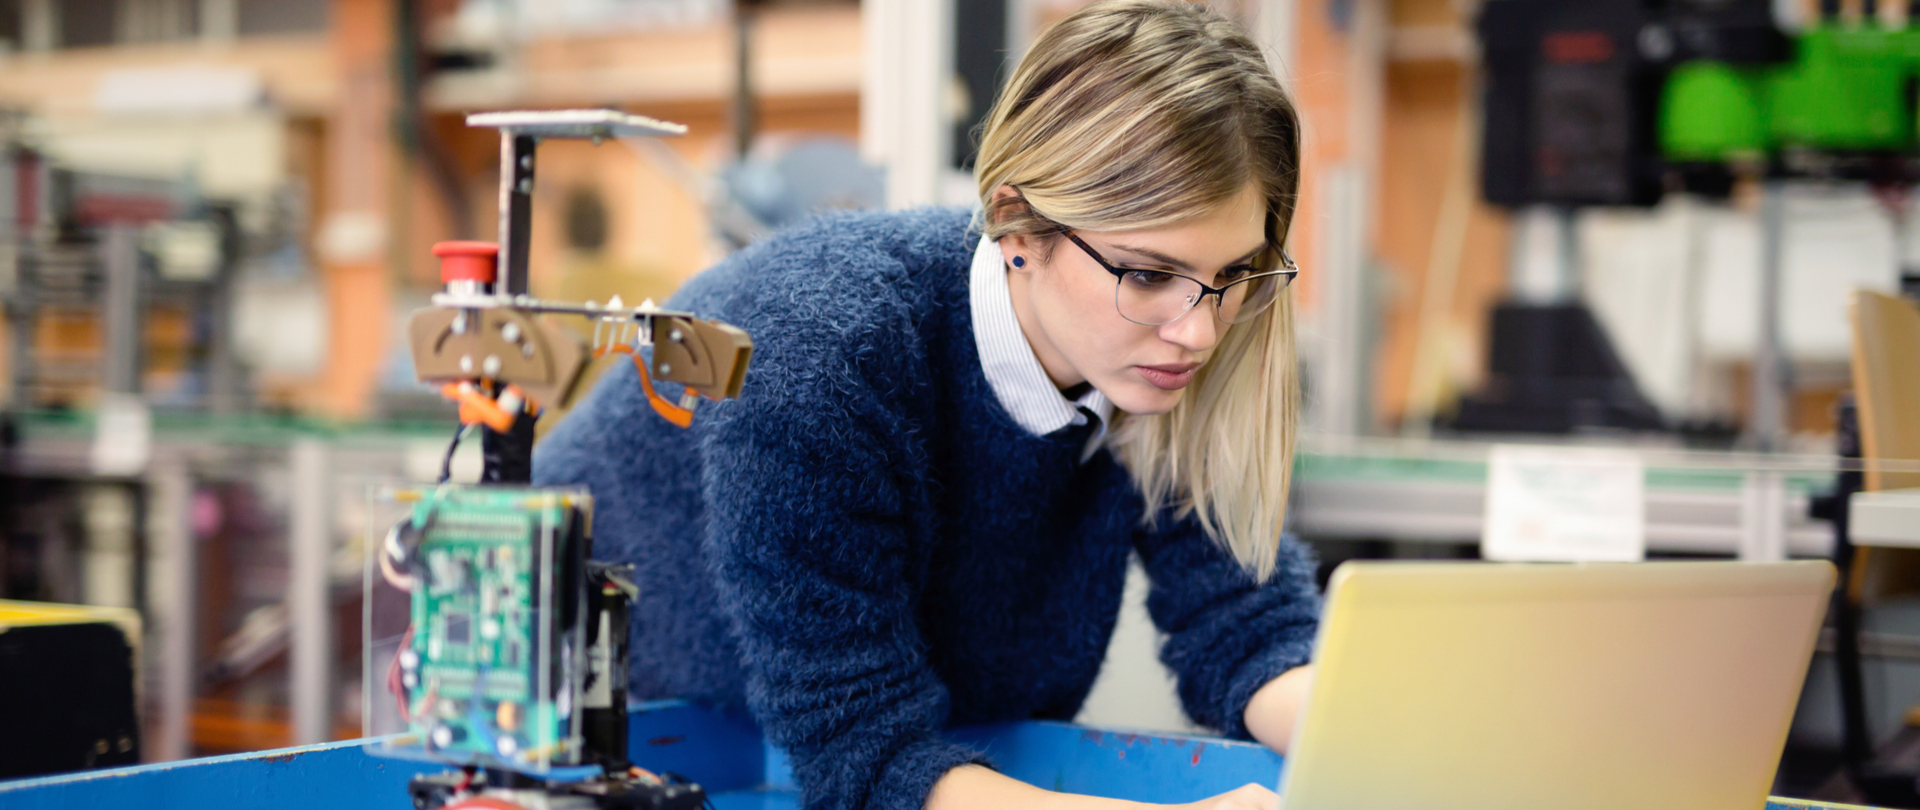 How much have attitudes shifted towards women in engineering?